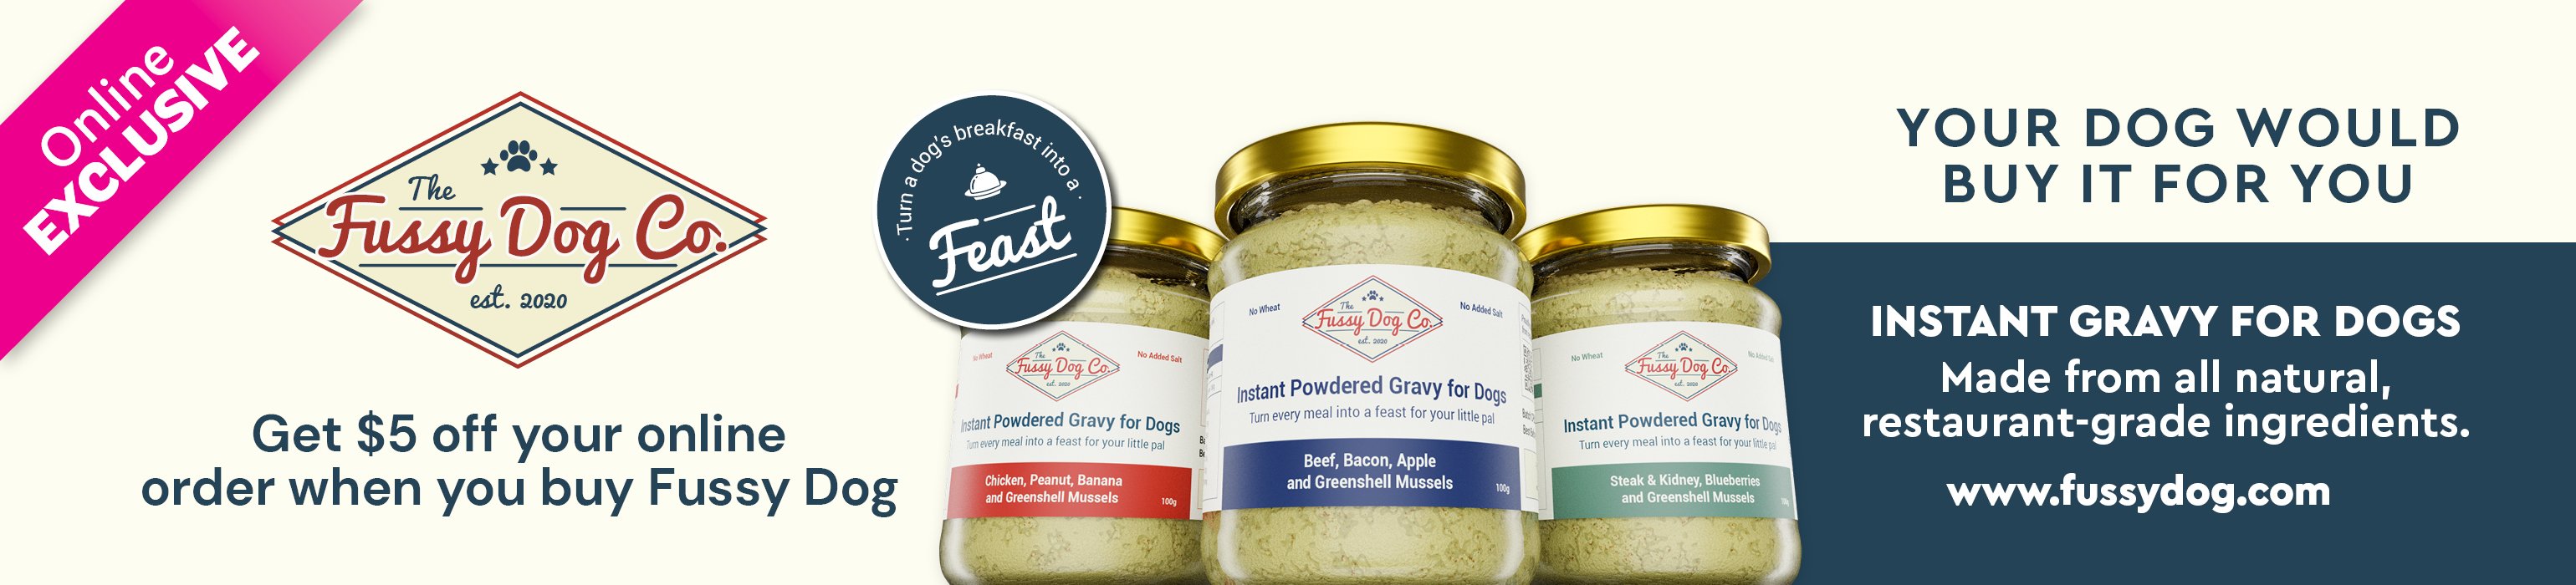 Fussy Dog co Instant Gravy for Dogs